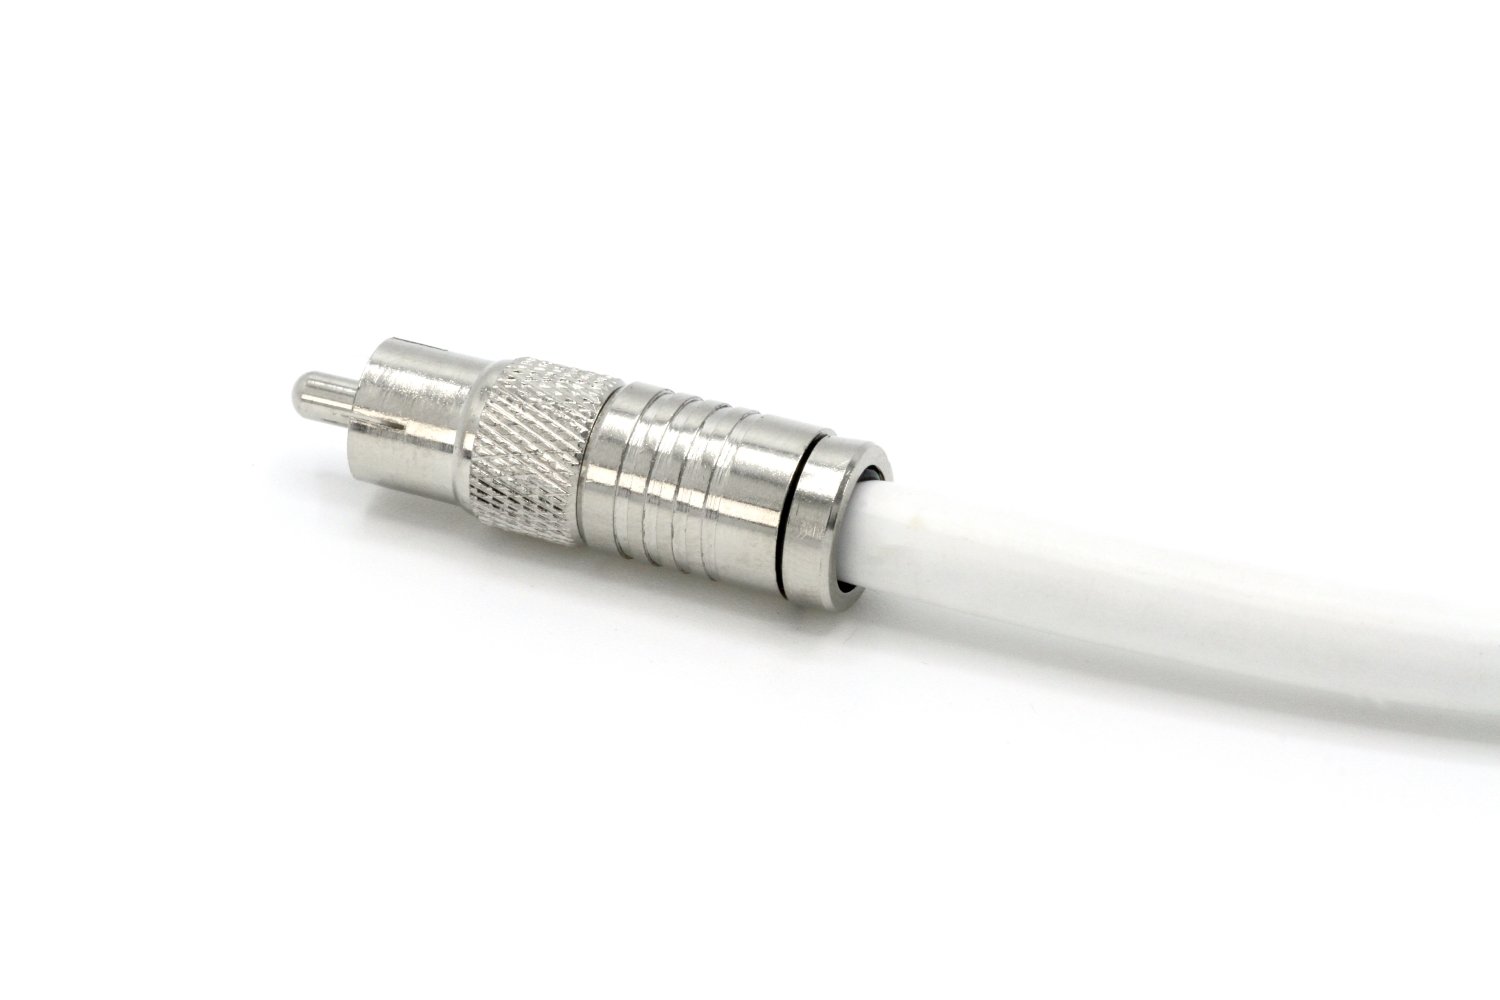 THE CIMPLE CO - White Digital Audio Coaxial Cable Subwoofer Cable - (S/PDIF) RCA Cable, 75 Feet - image 3 of 6